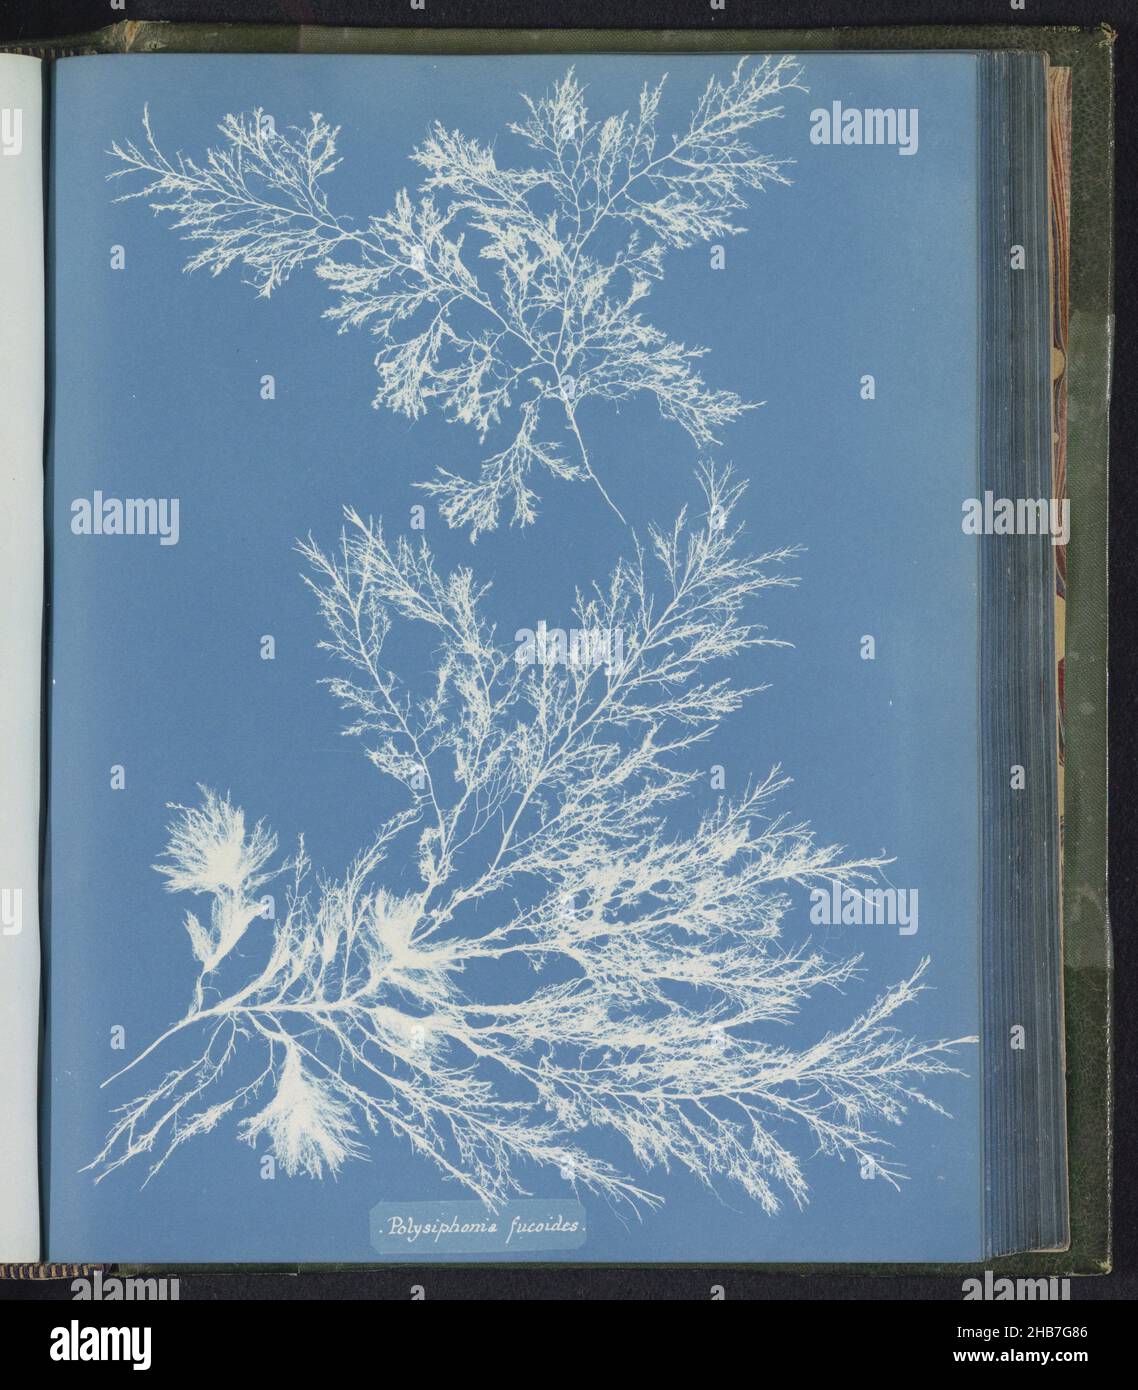 Polysiphonia fucoides, Anna Atkins, United Kingdom, c. 1843 - c. 1853, photographic support, cyanotype, height 250 mm × width 200 mm Stock Photo